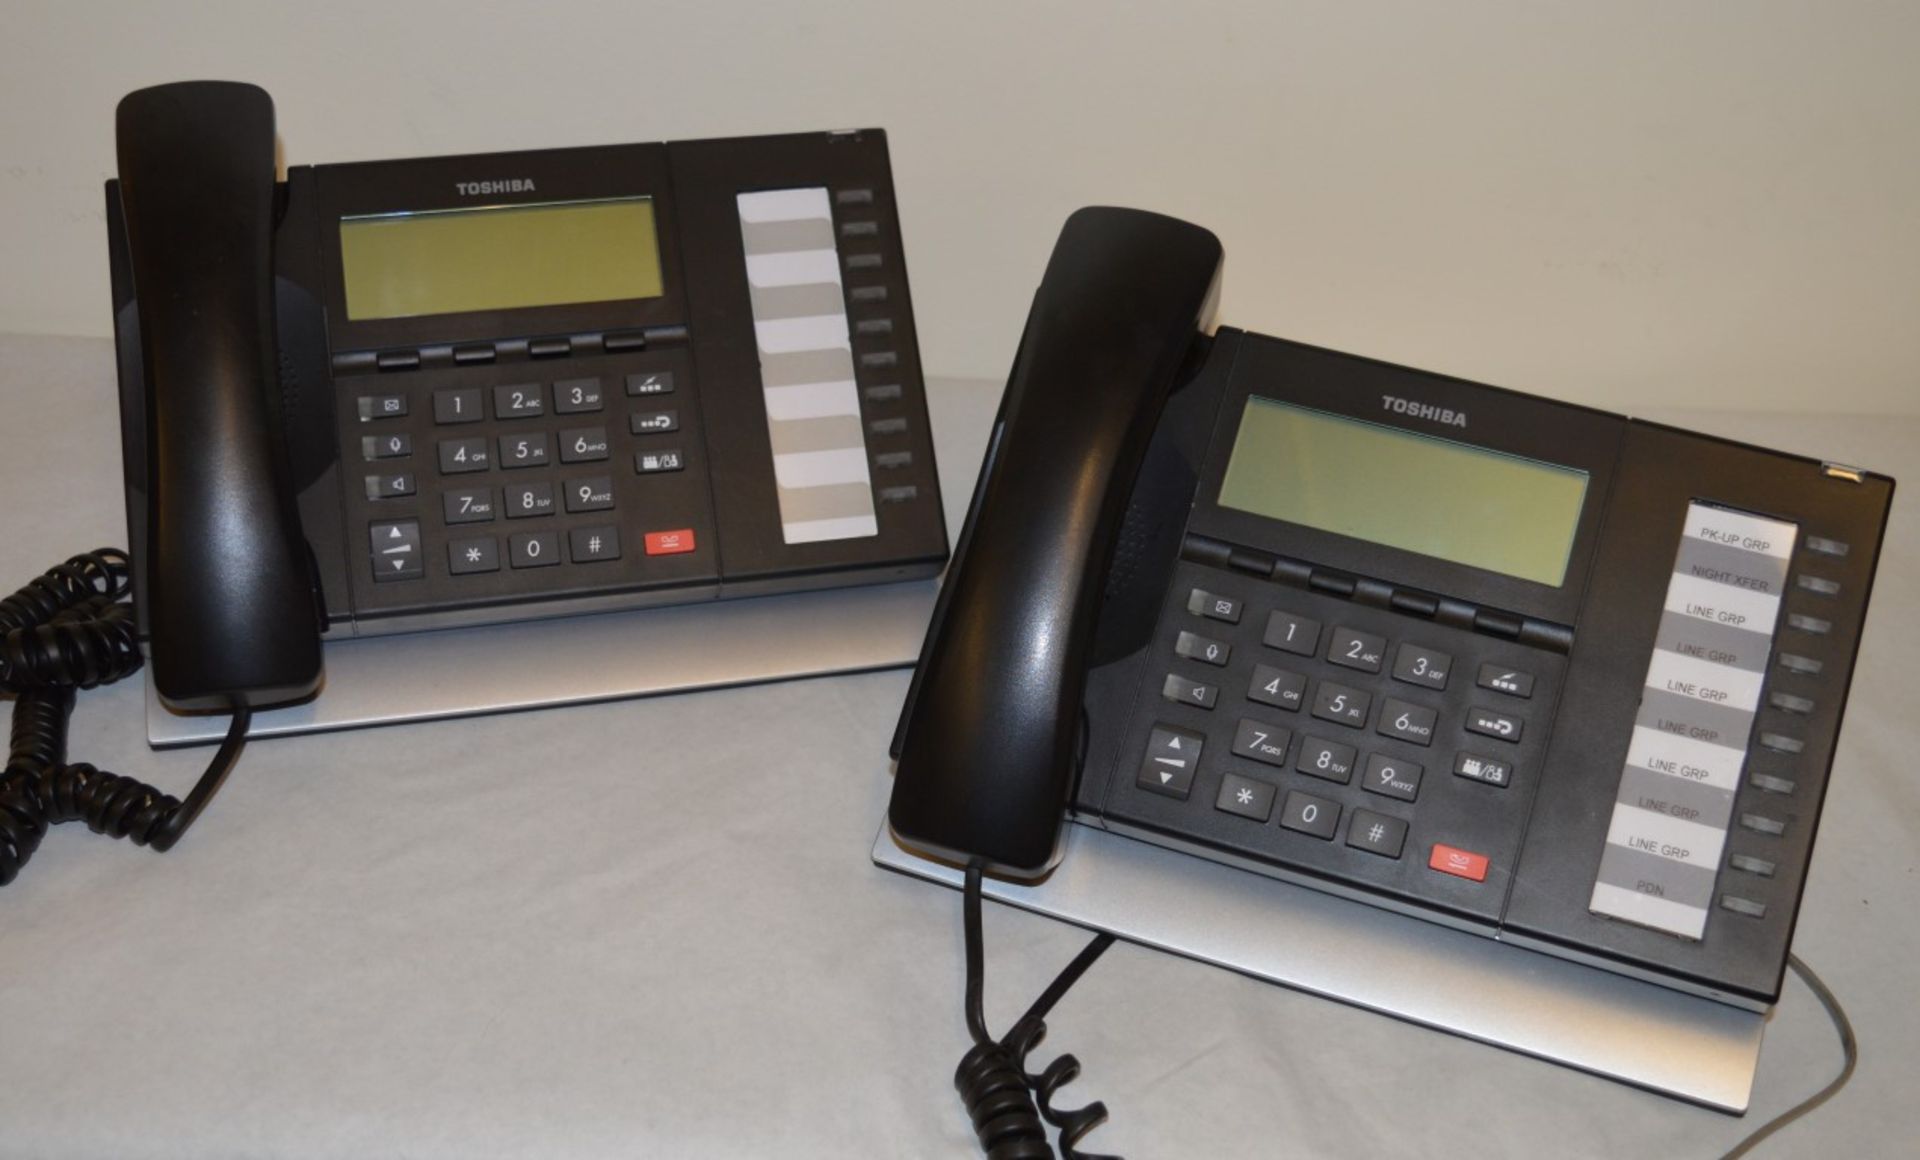 2 x Toshiba Digital Display Hands Free Feature Phones - Professional Office Telephones - Features - Image 2 of 4